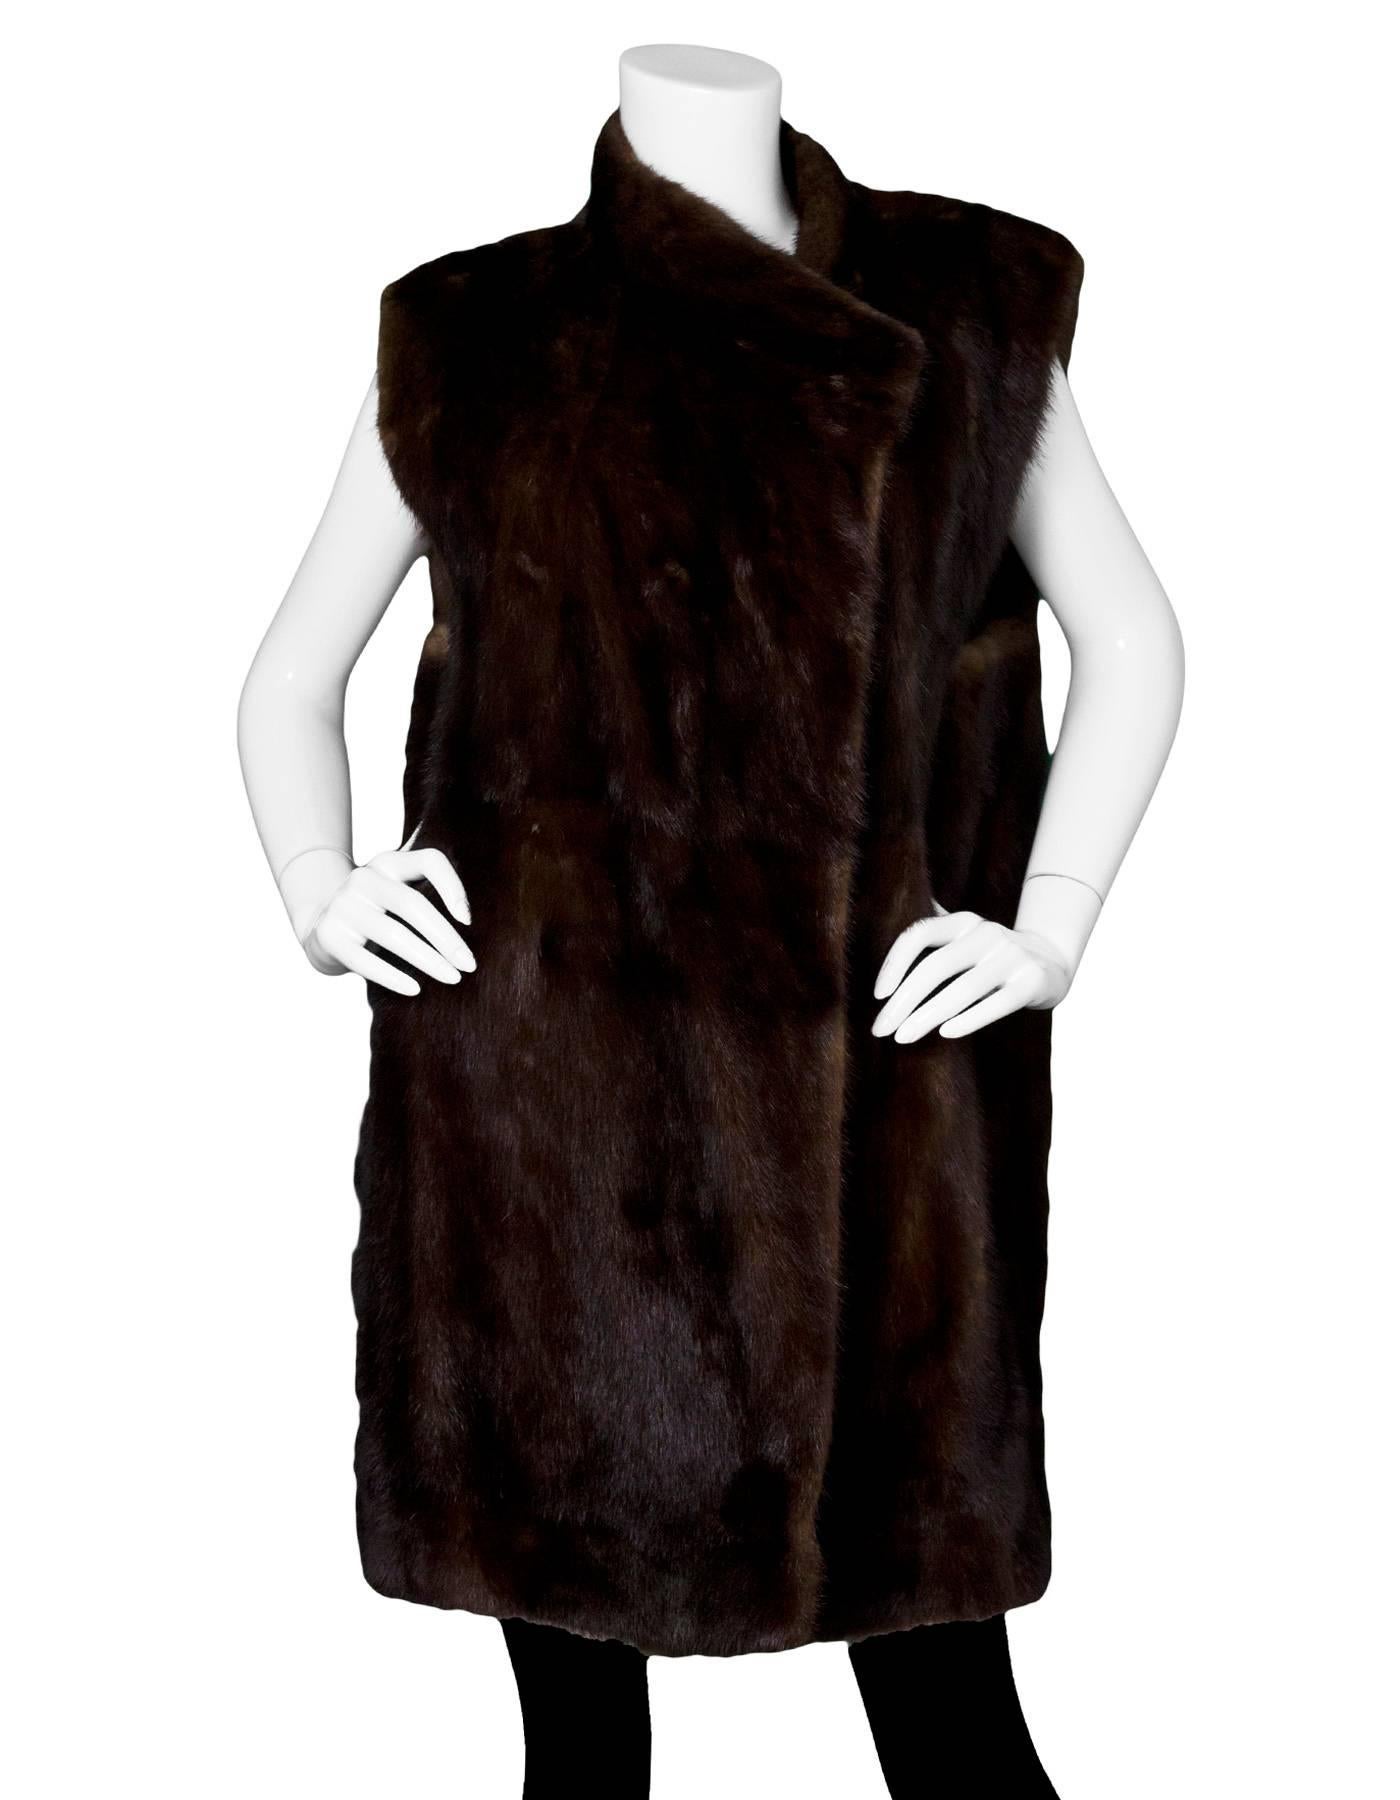 Vintage Brown Fur Open Front Vest/Lining 
**Please note: this vintage piece was originall apart of another coat or jacket as an insert and still contains buttons on interior for attachment**

Color: Brown
Composition: Fur
Lining: Believed to be a